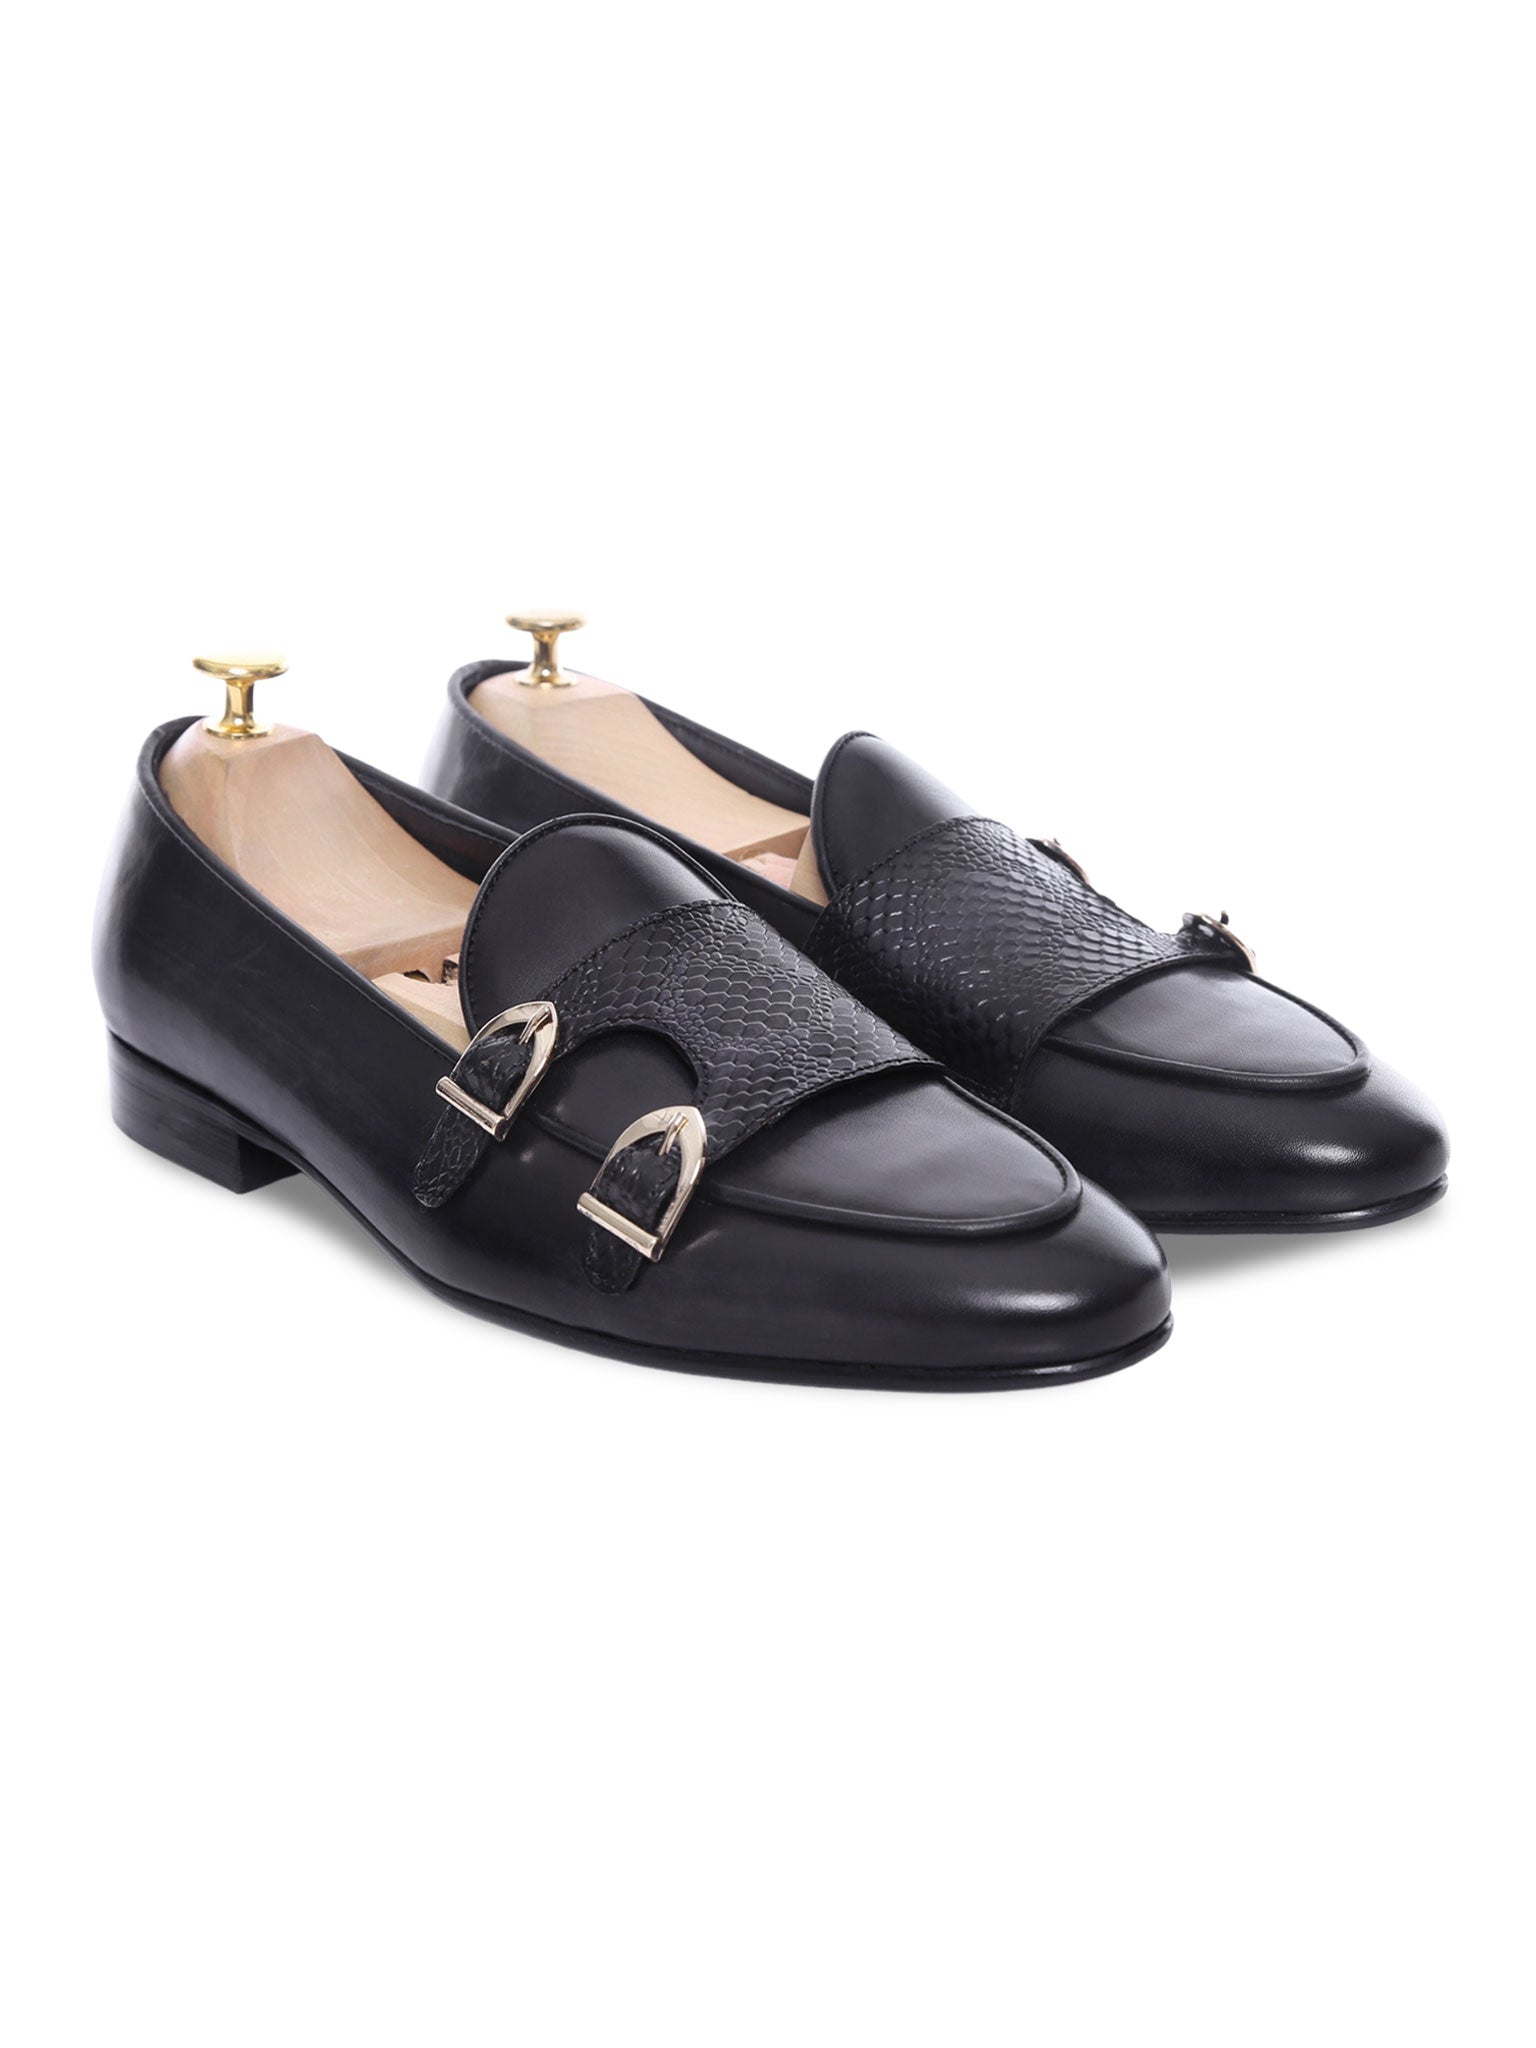 Belgian Loafer - Black Grey Snake Skin Double Monk Strap (Hand Painted Patina) - Zeve Shoes